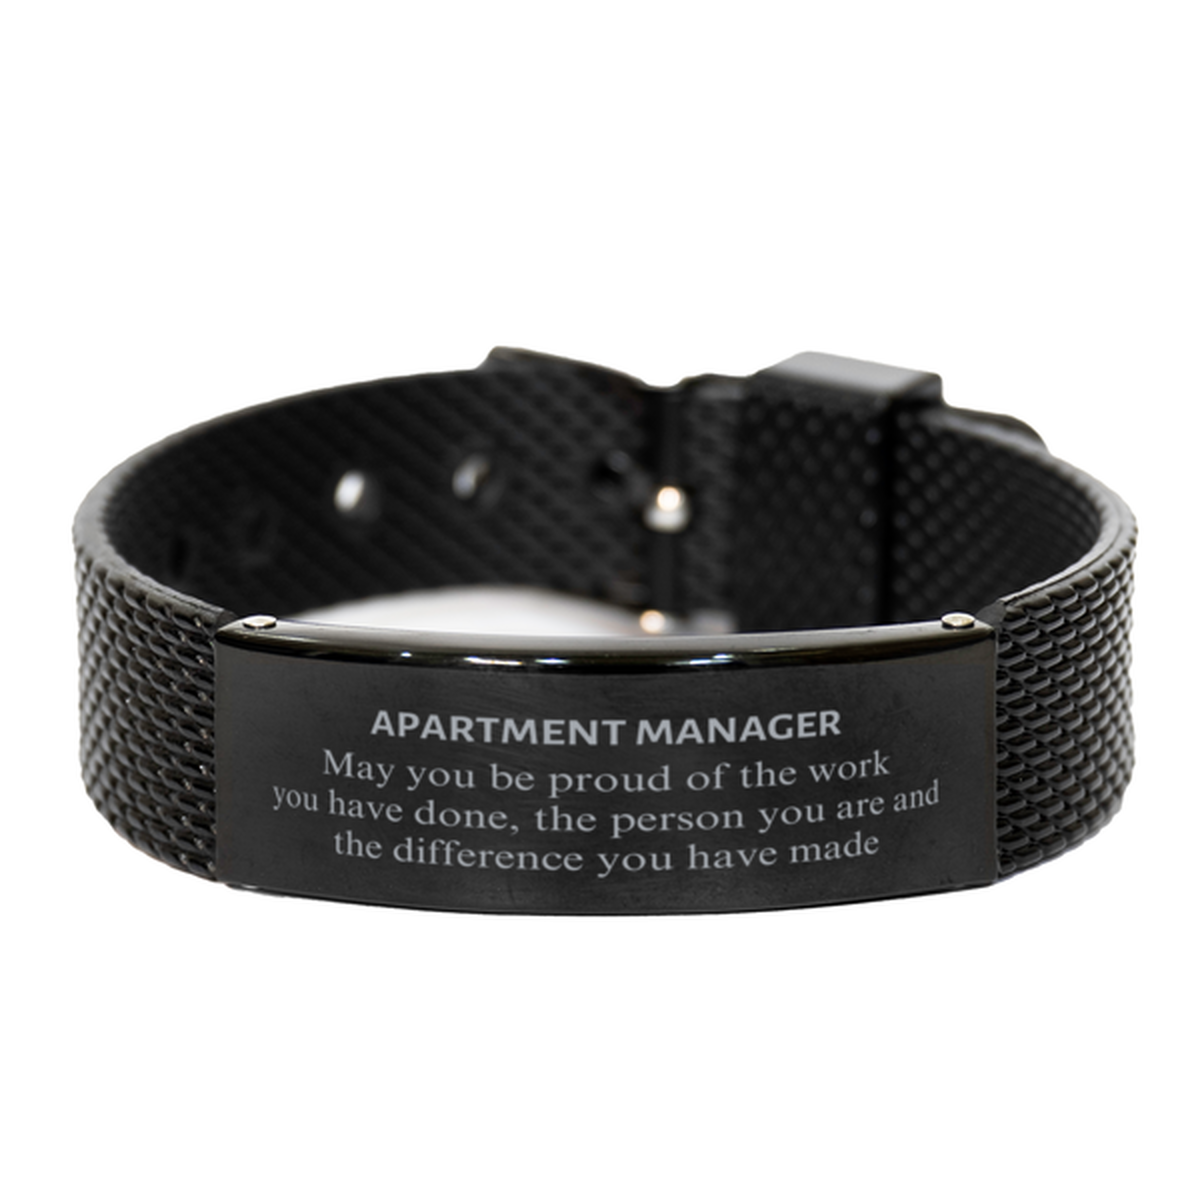 Apartment Manager May you be proud of the work you have done, Retirement Apartment Manager Black Shark Mesh Bracelet for Colleague Appreciation Gifts Amazing for Apartment Manager